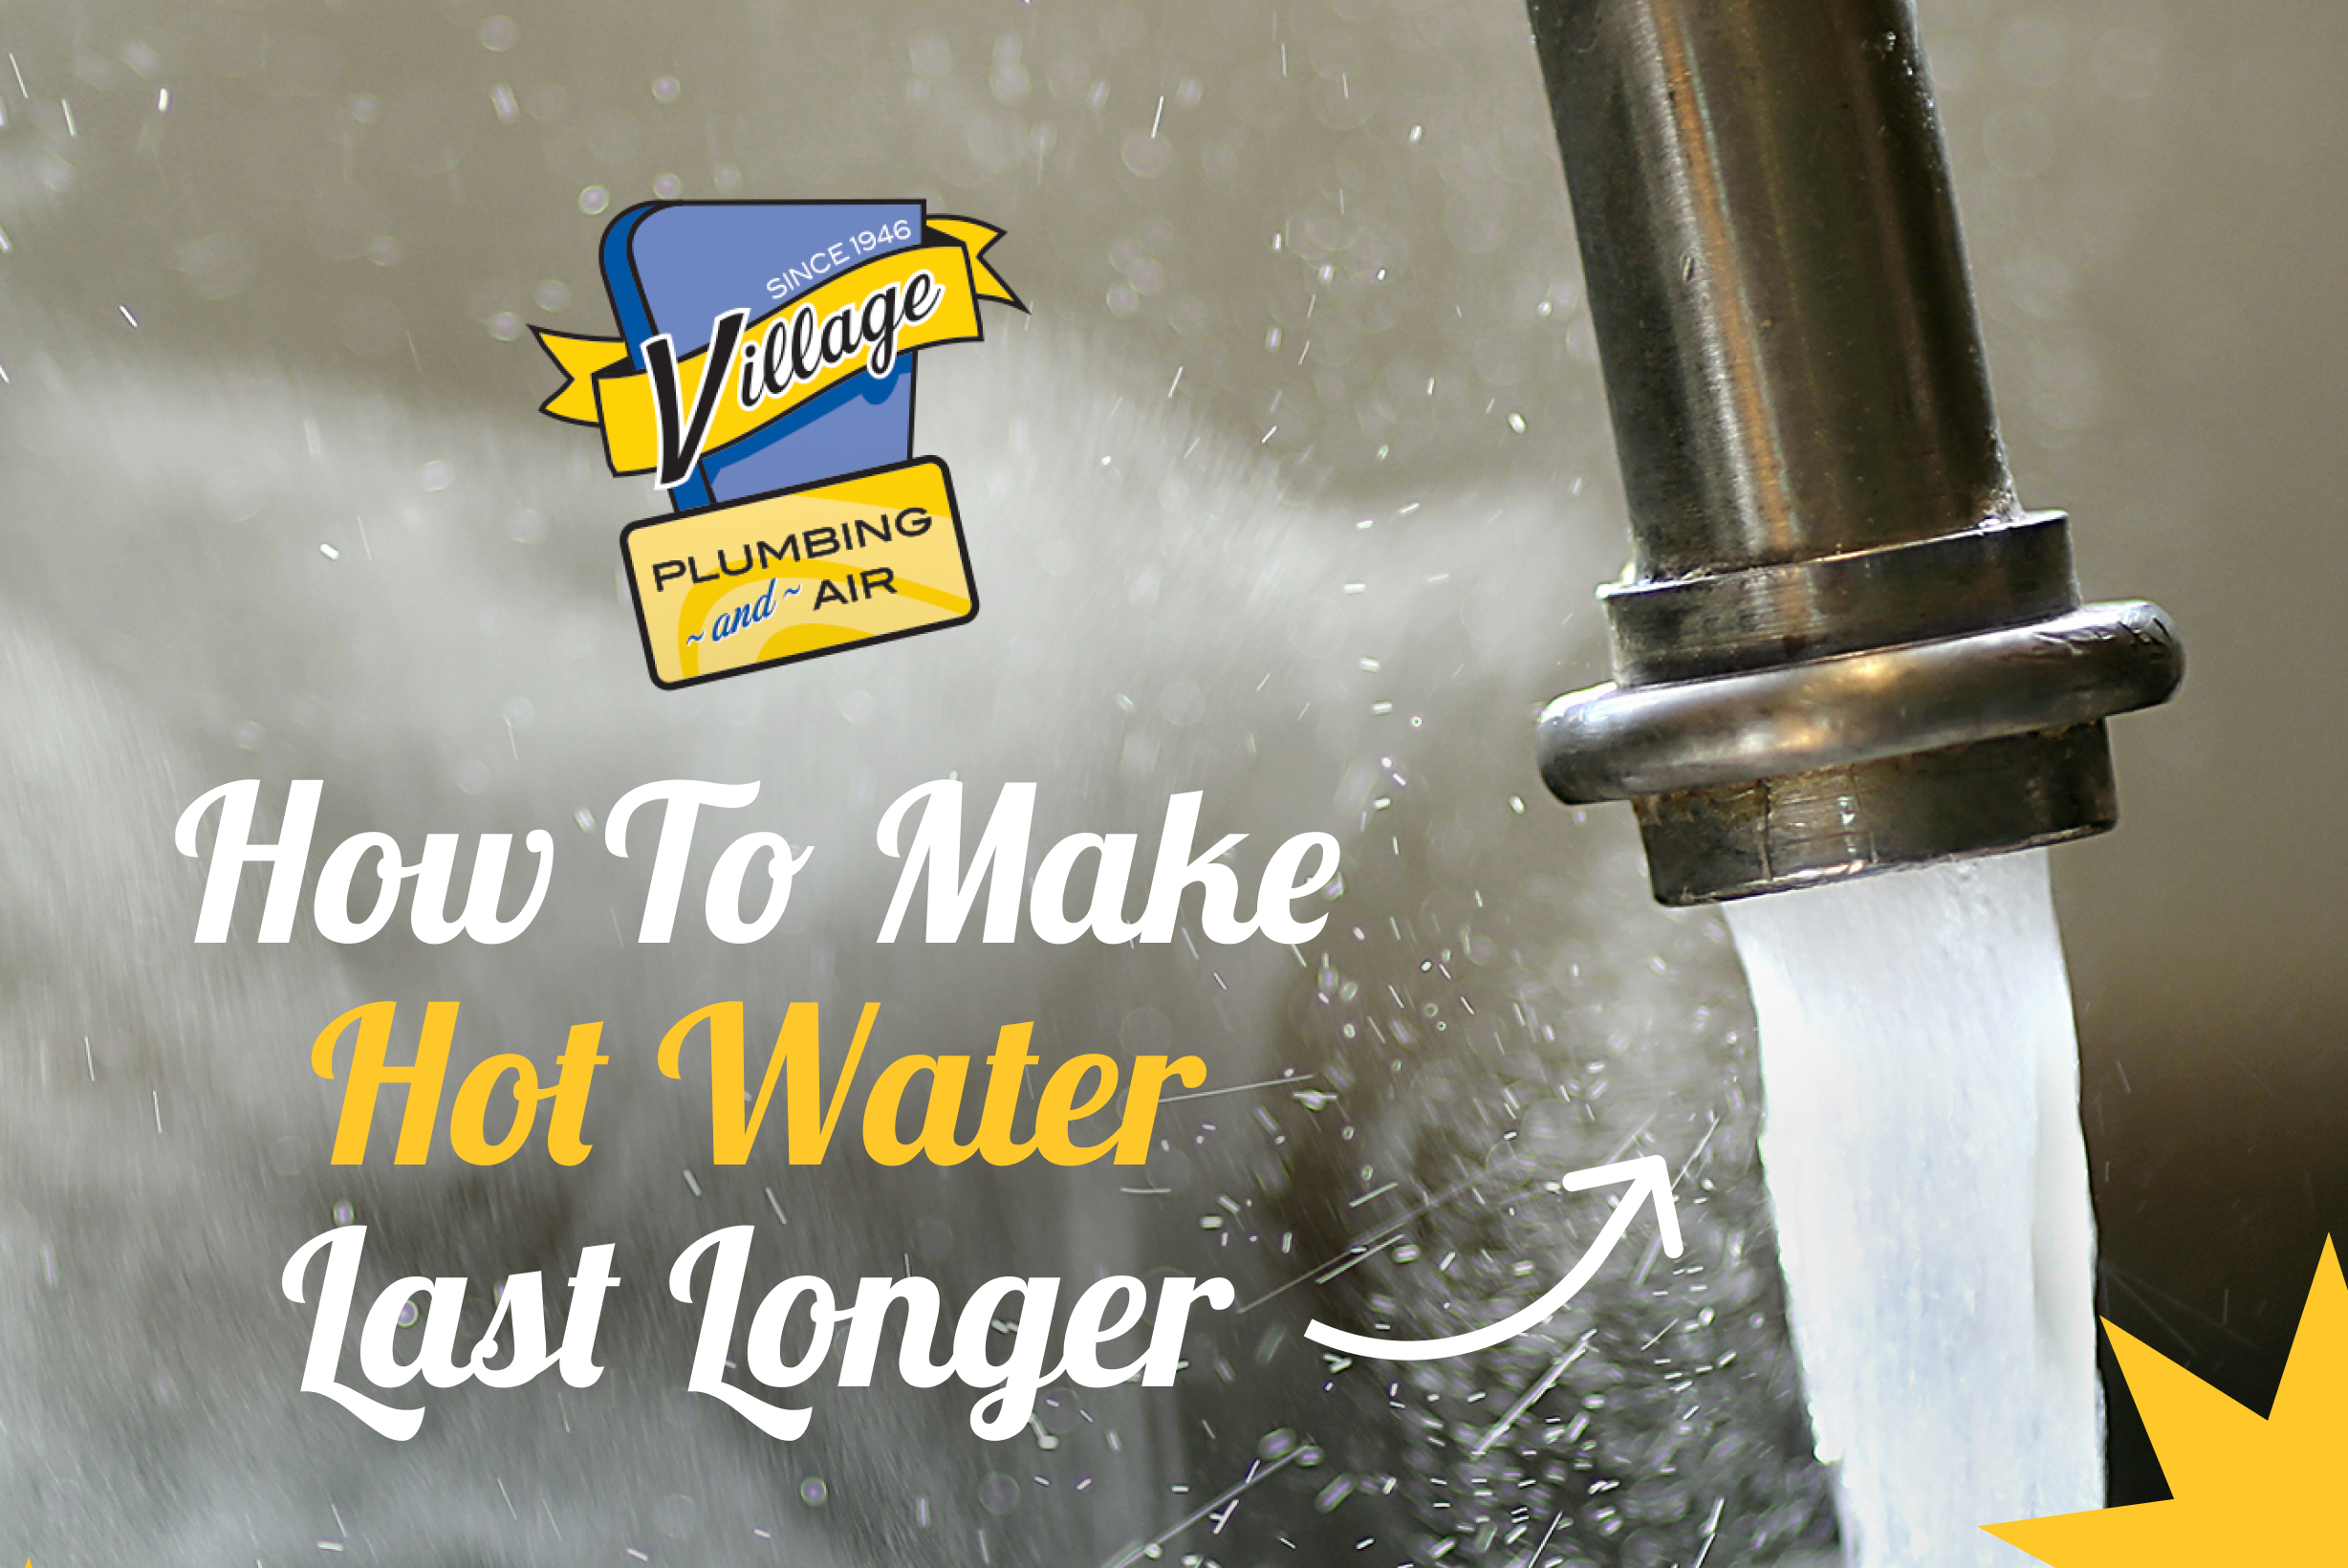 How to make hot water last longer